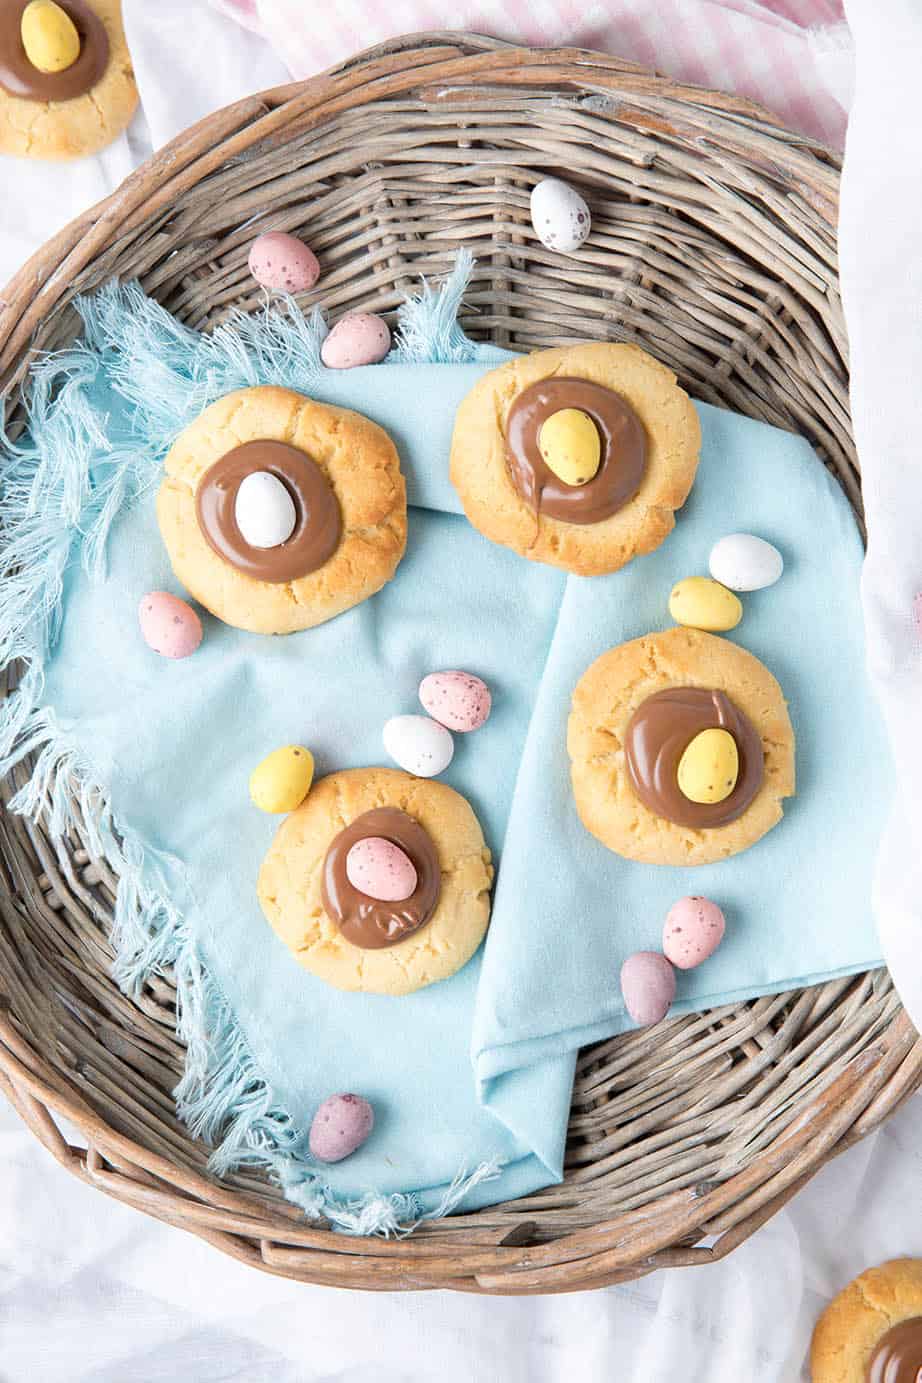 Overhead shot of chocolate thumbprint Easter Cookies in a basket on blue napkin